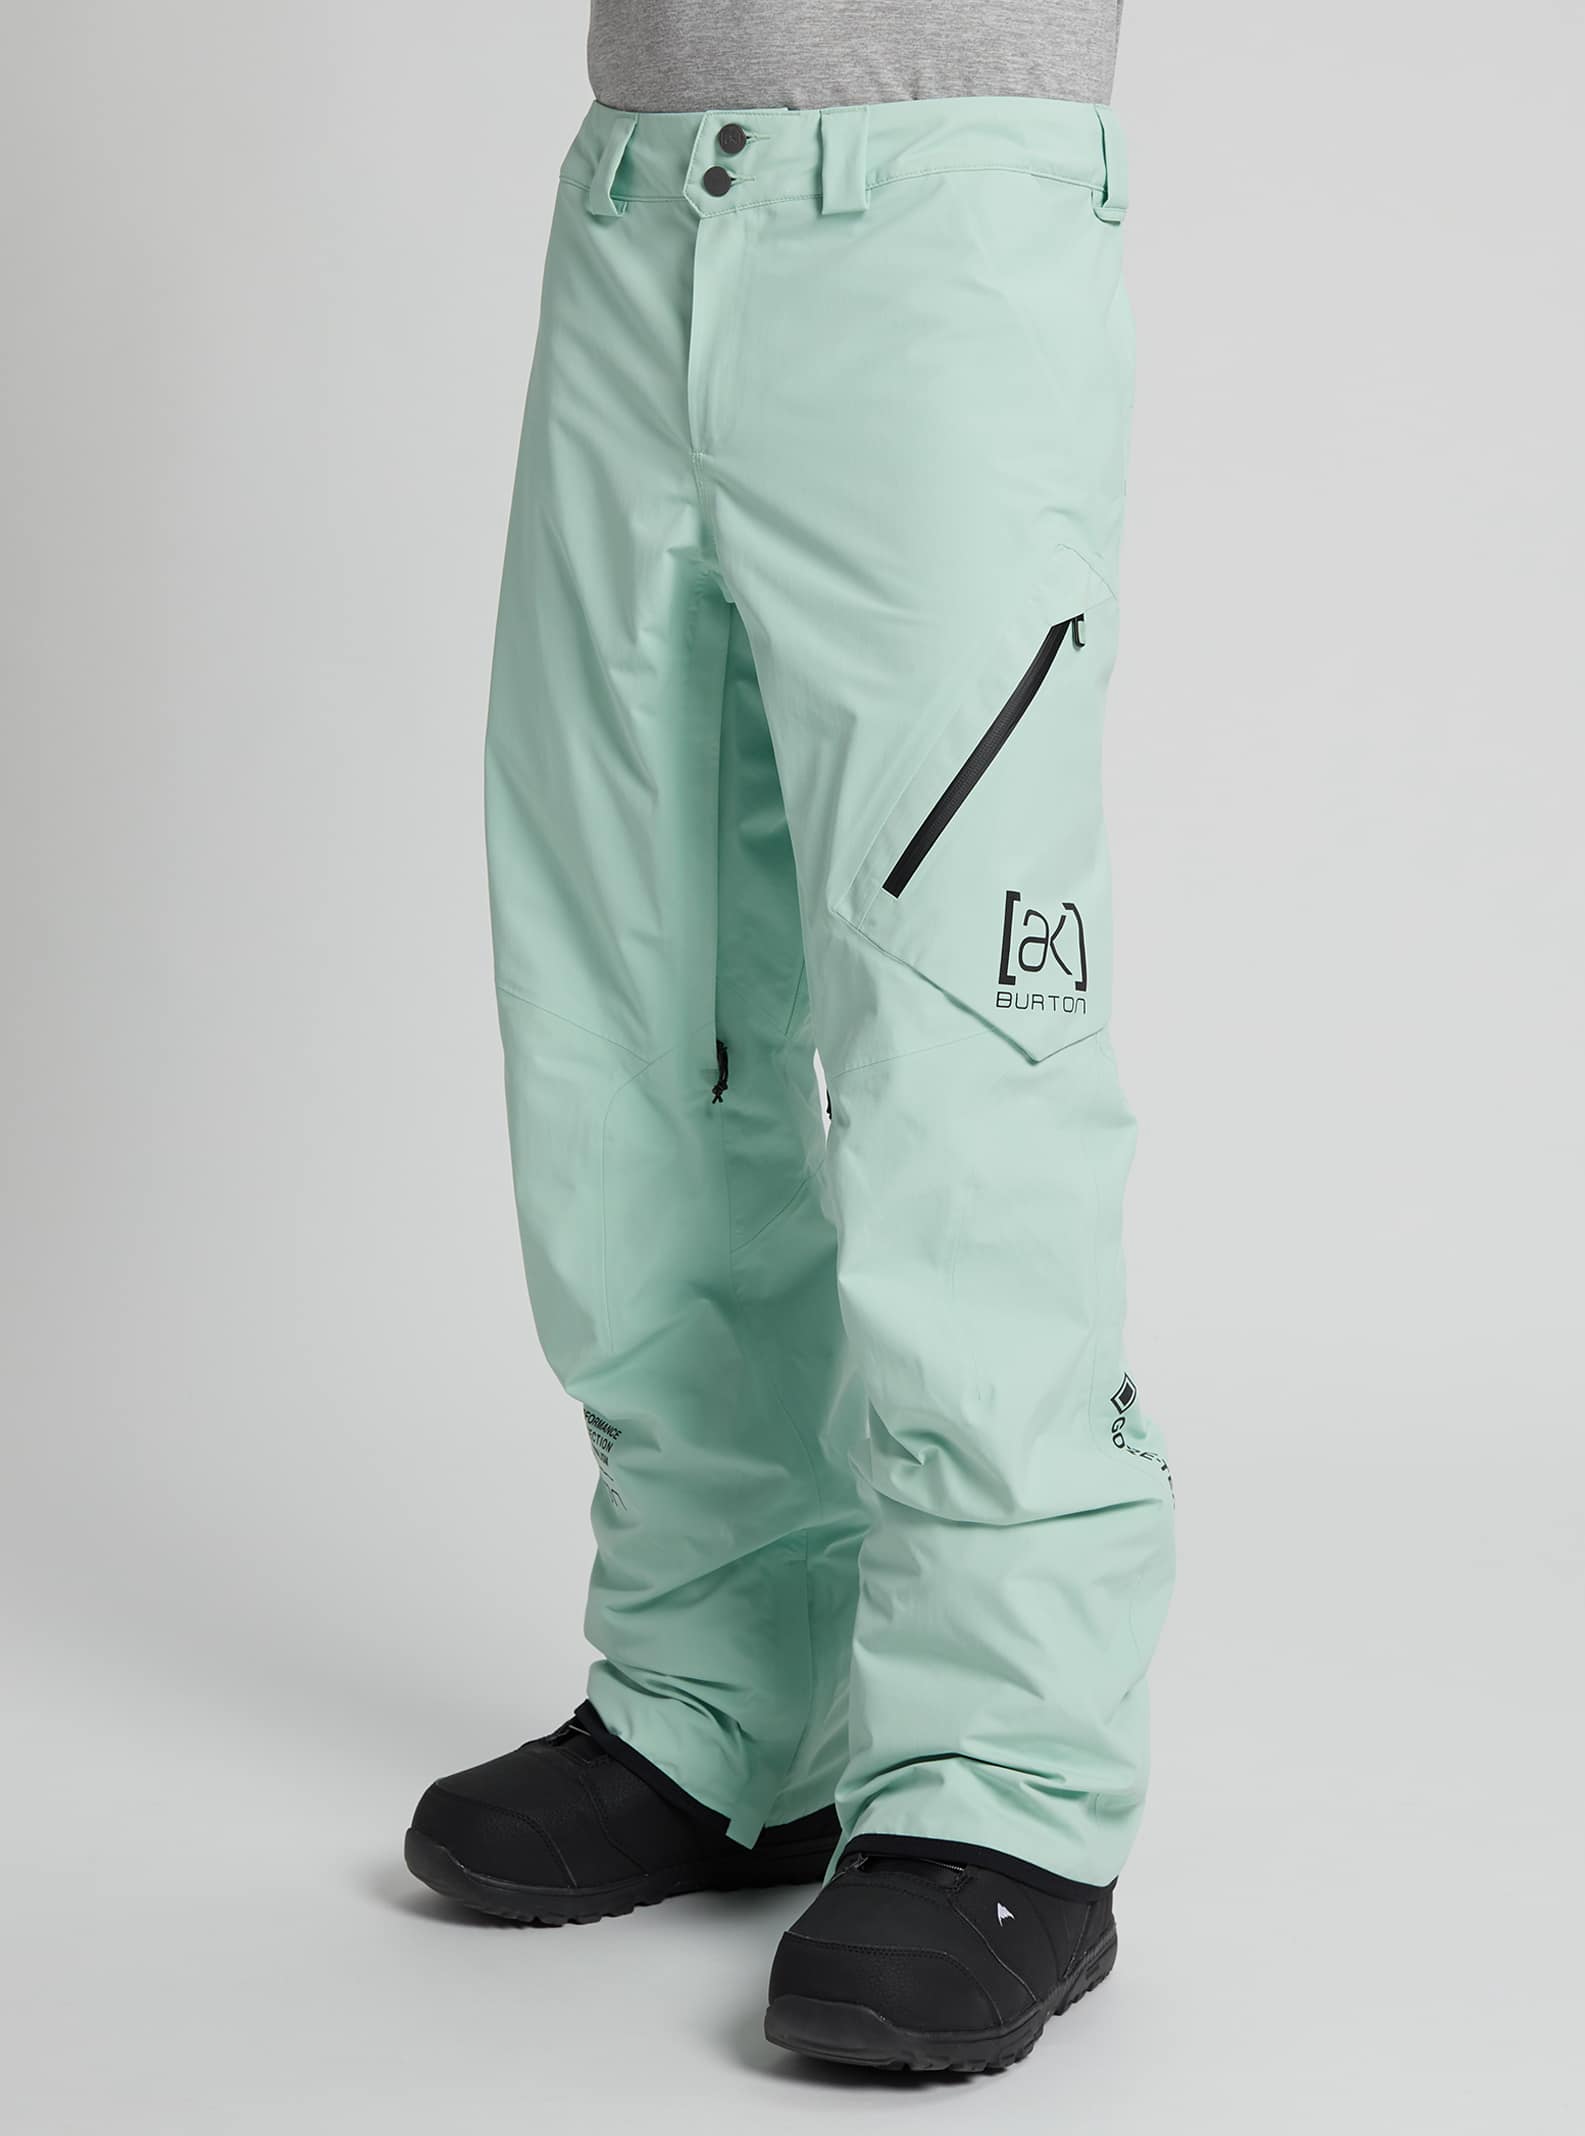 Outlet for Snowboard Gear & Clothing | Burton Snowboards AT